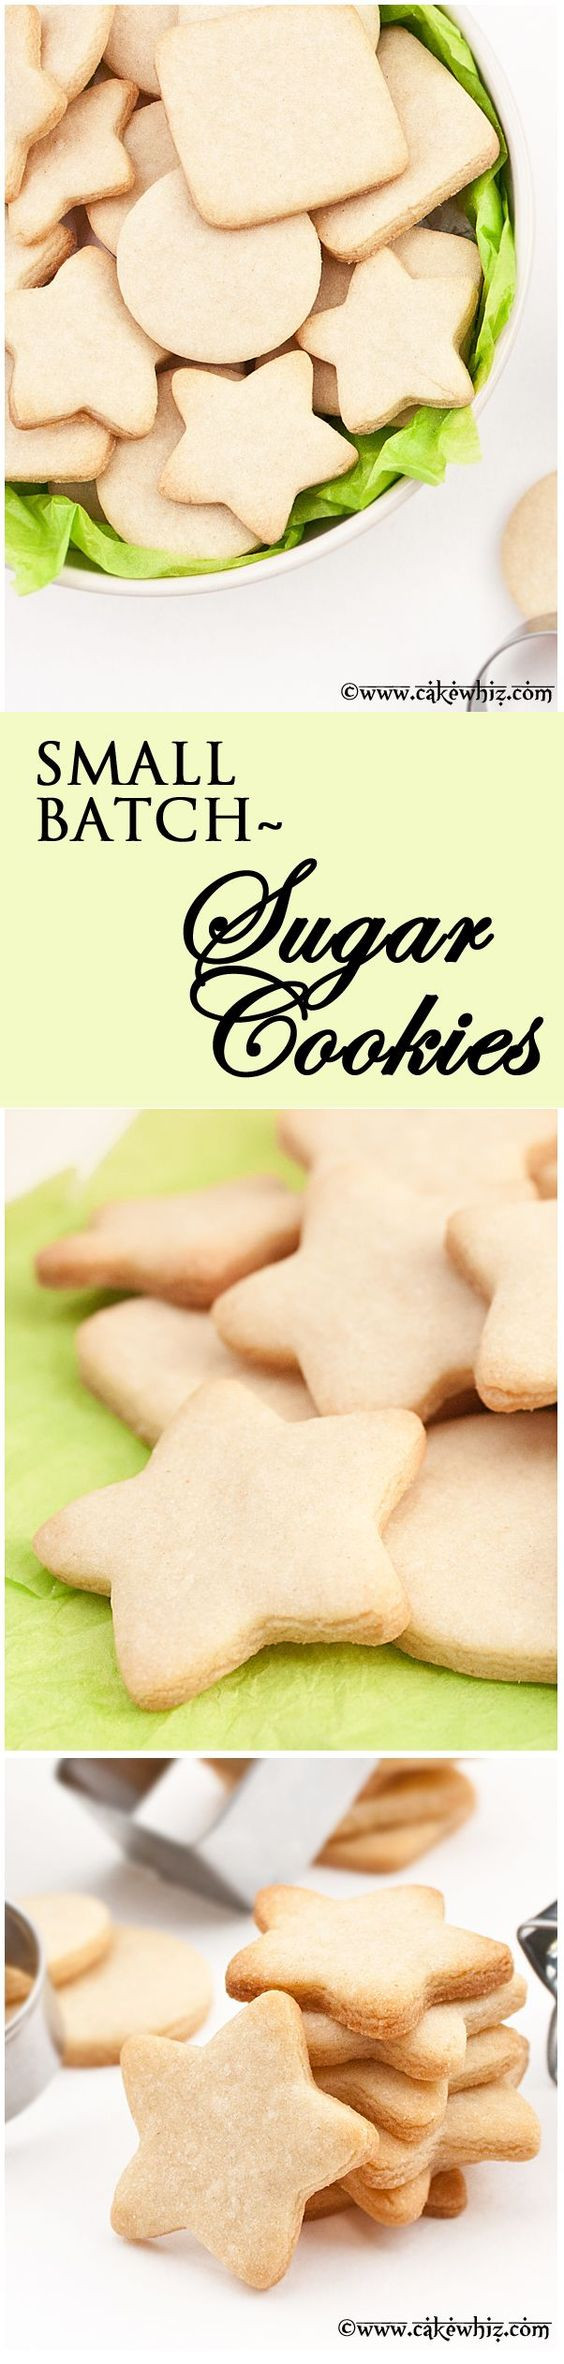 Small Batch Sugar Cookies
 Small batch of SUGAR COOKIE recipe that yields only a few